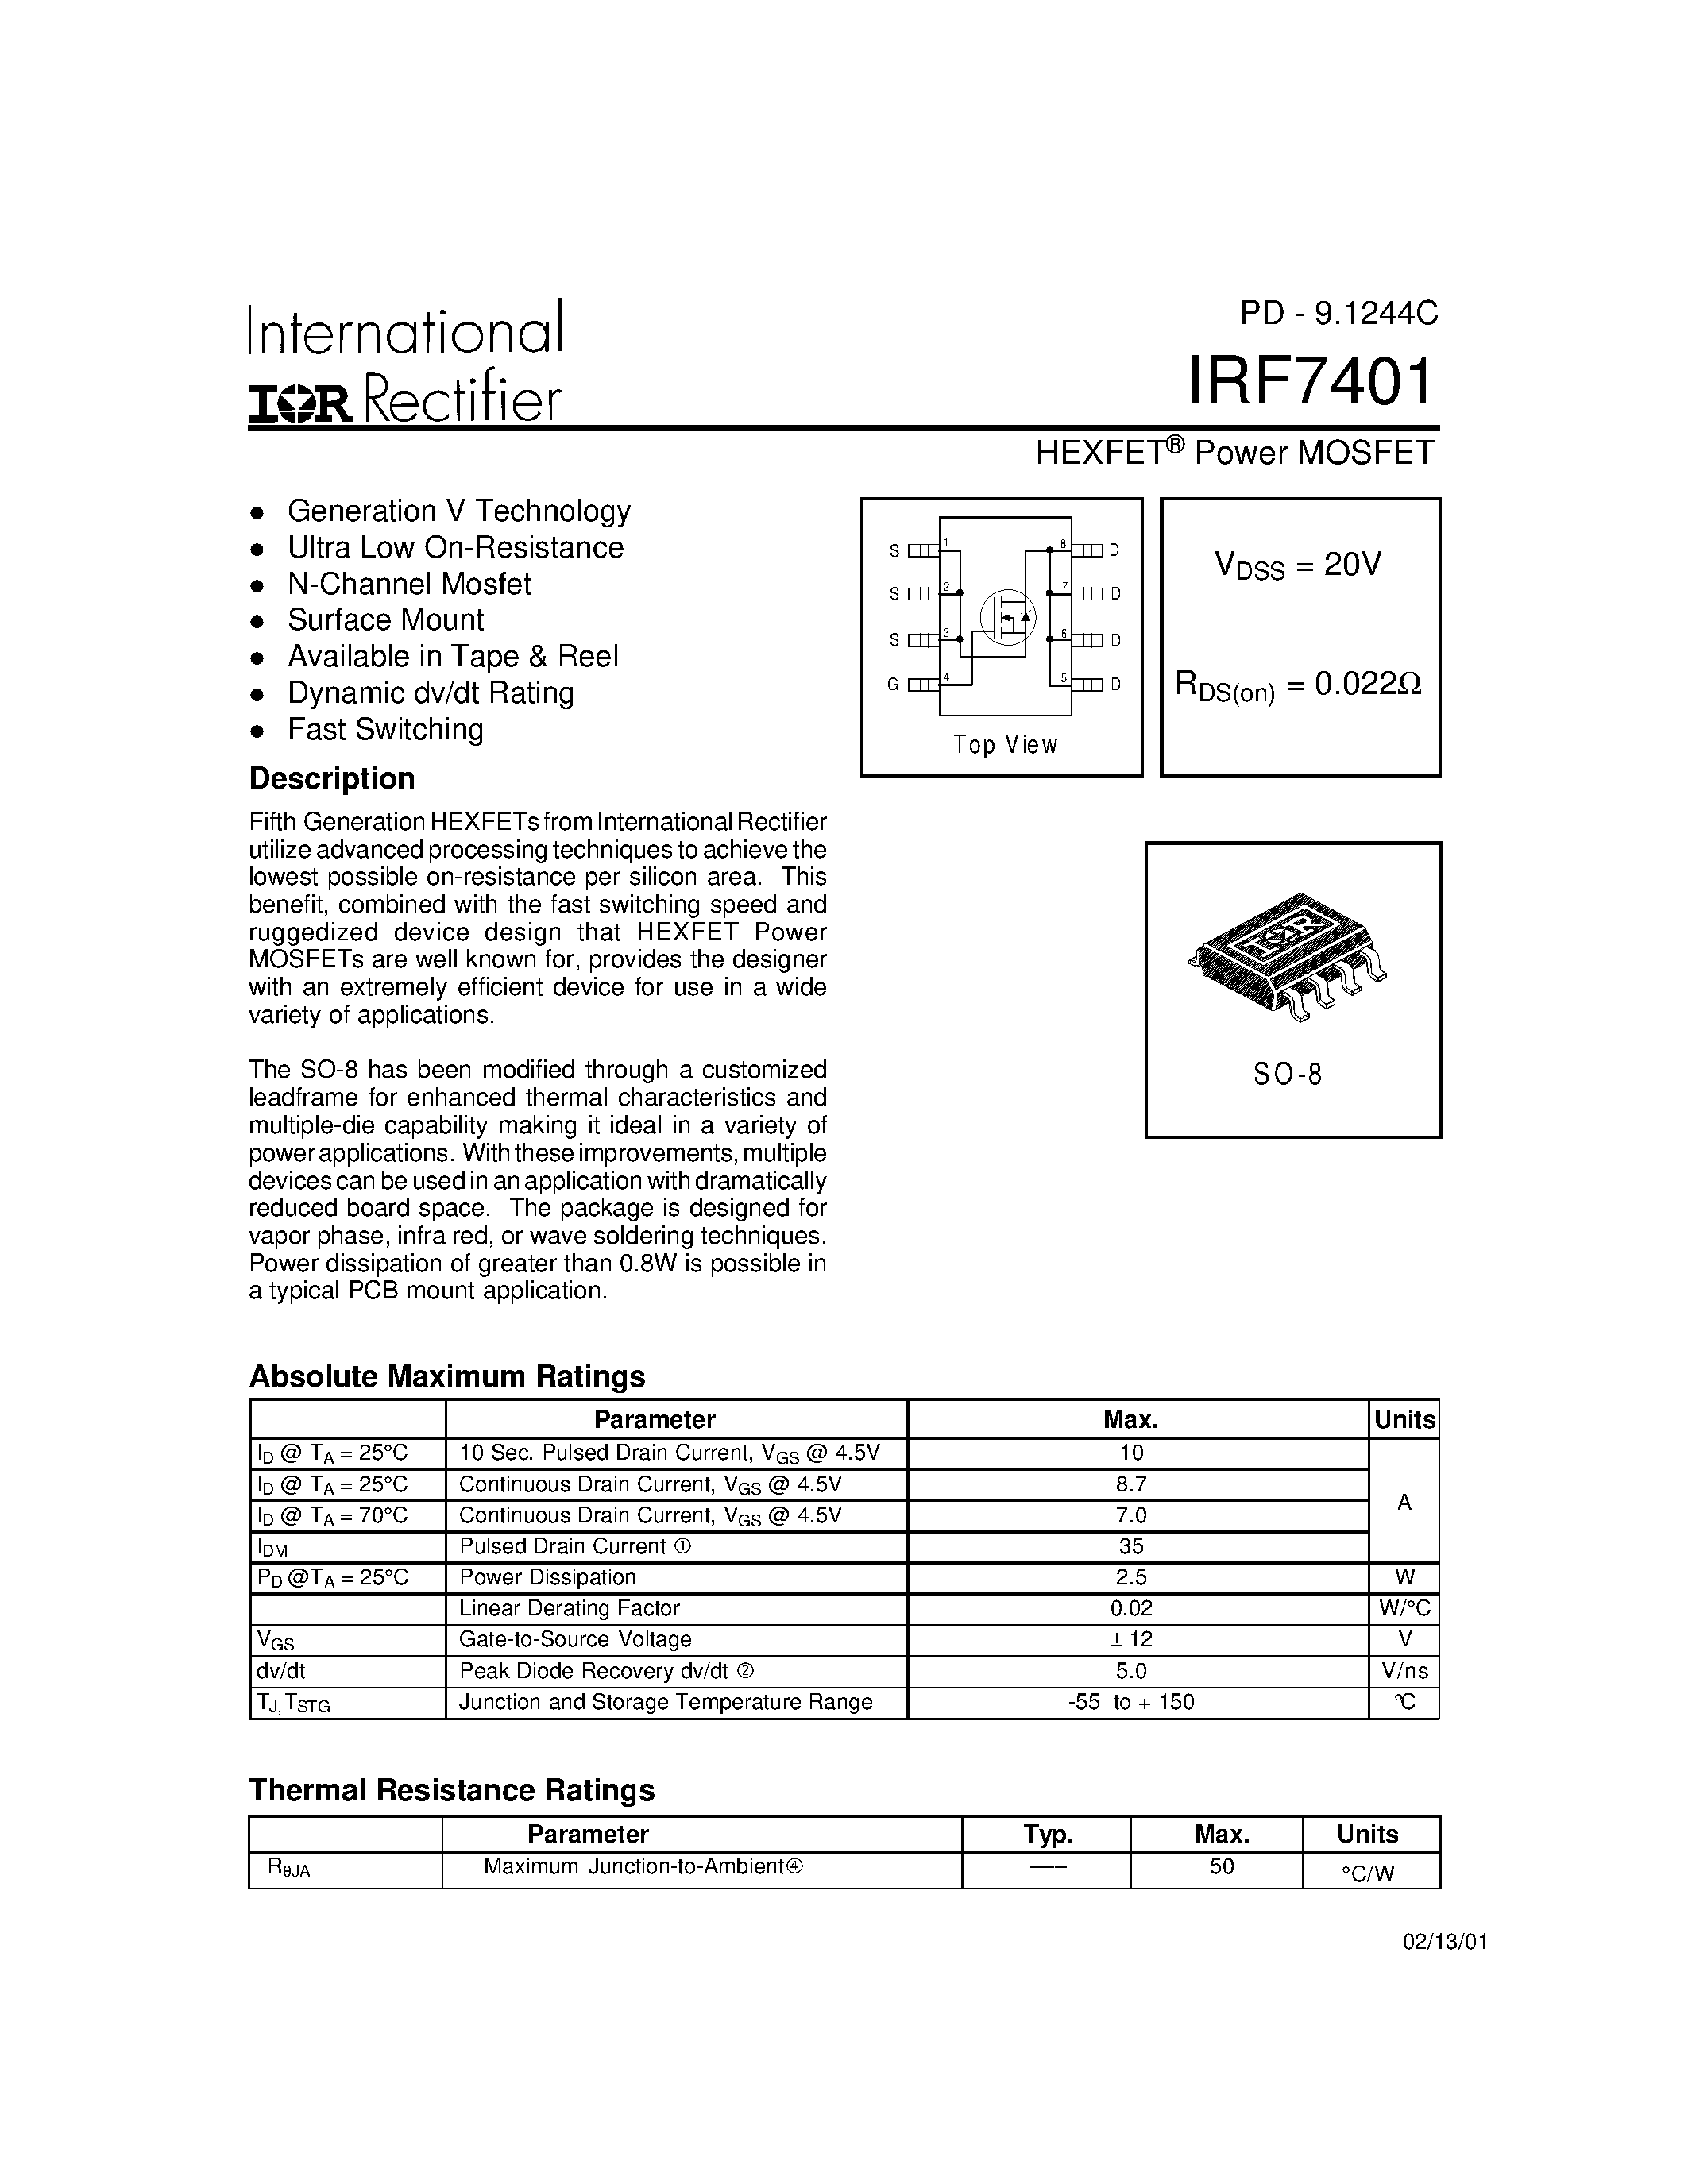 Datasheet IRF7401 - Power MOSFET(Vdss=20V/ Rds(on)=0.022ohm) page 1